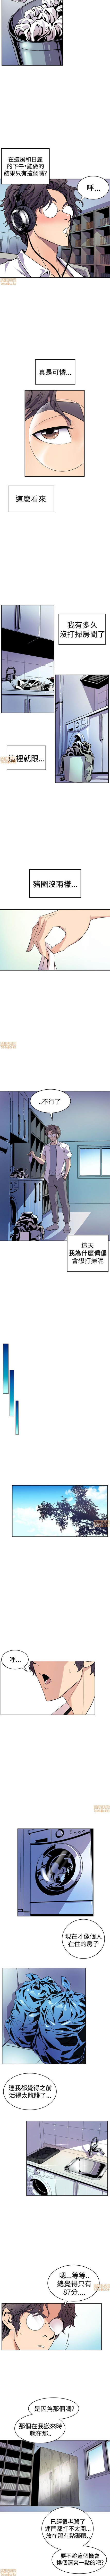 Duro 縫隙 1-2 Cougar - Page 6